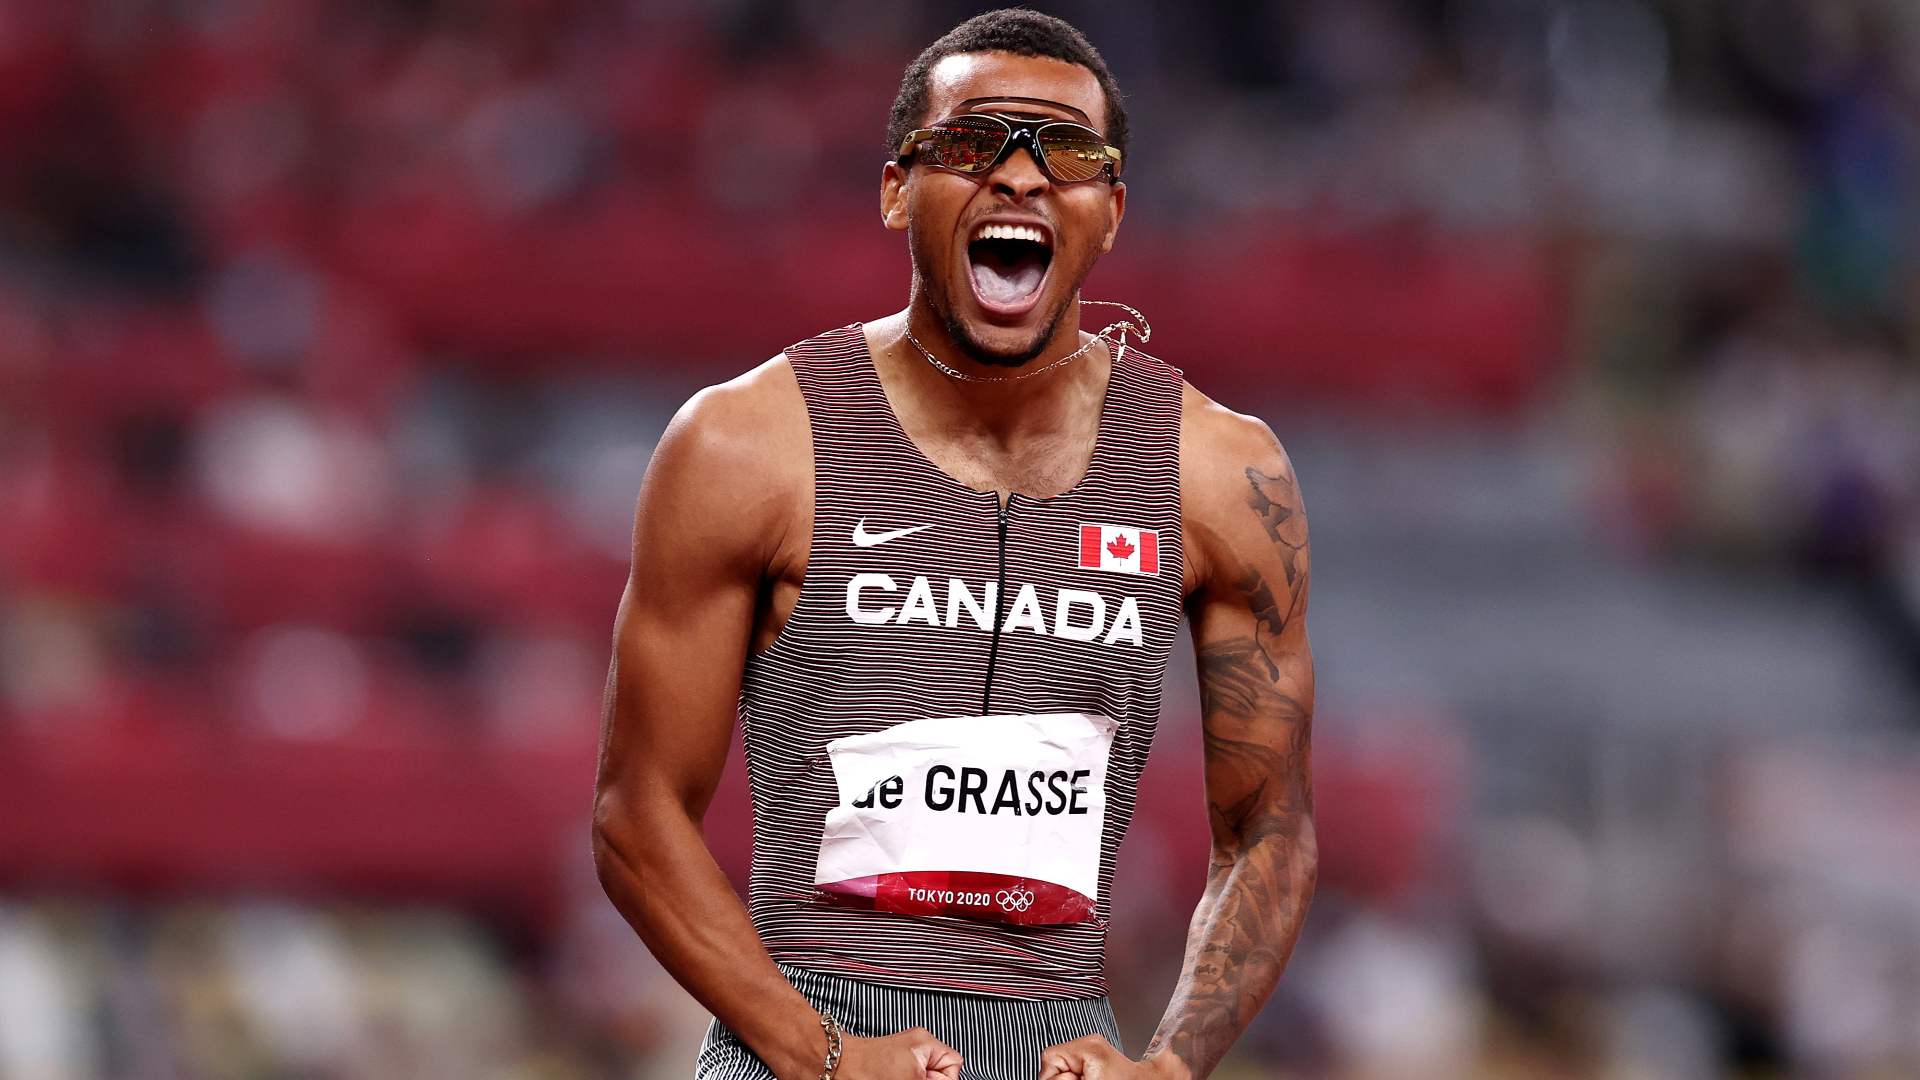 Andre De Grasse celebrating at the Tokyo Olympics 2020 (Twitter - @Olympics)